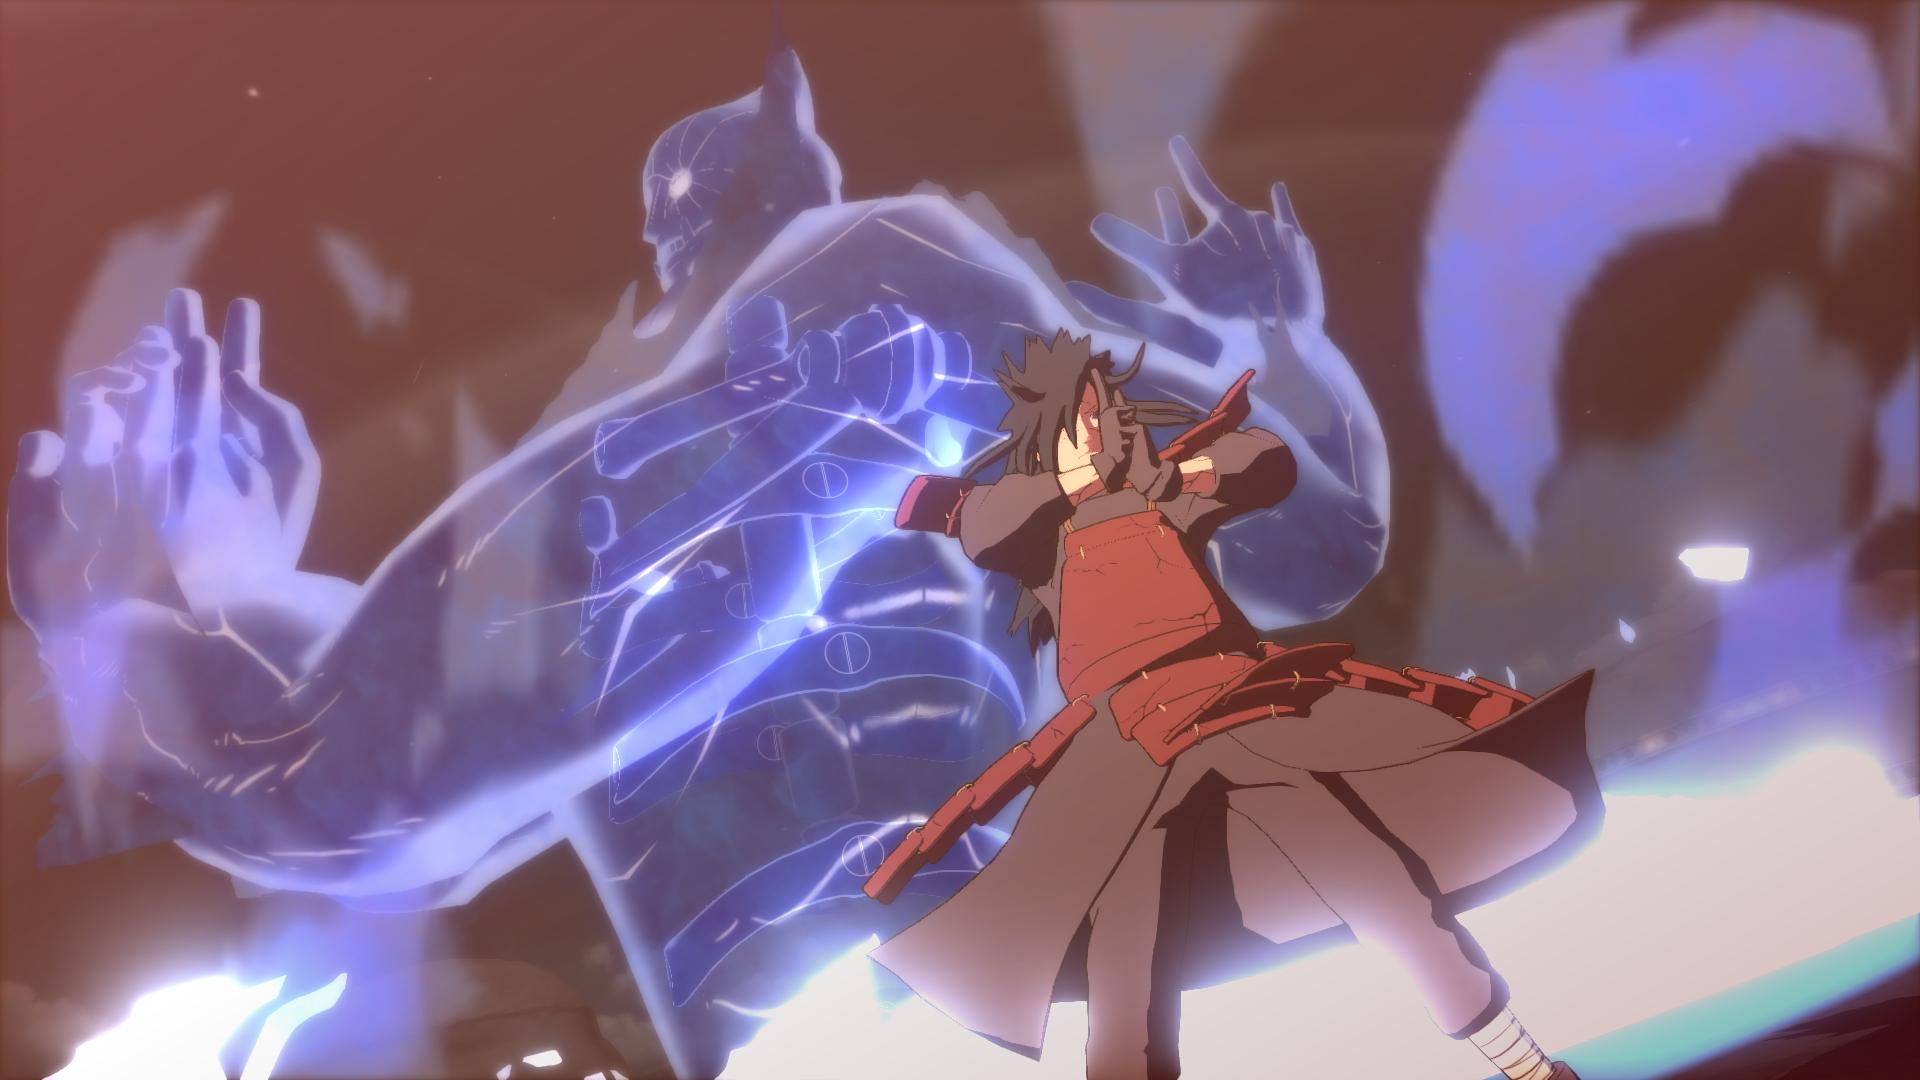 Naruto Shippuden: Ultimate Ninja Storm 4 HD Wallpapers, Pictures, Images